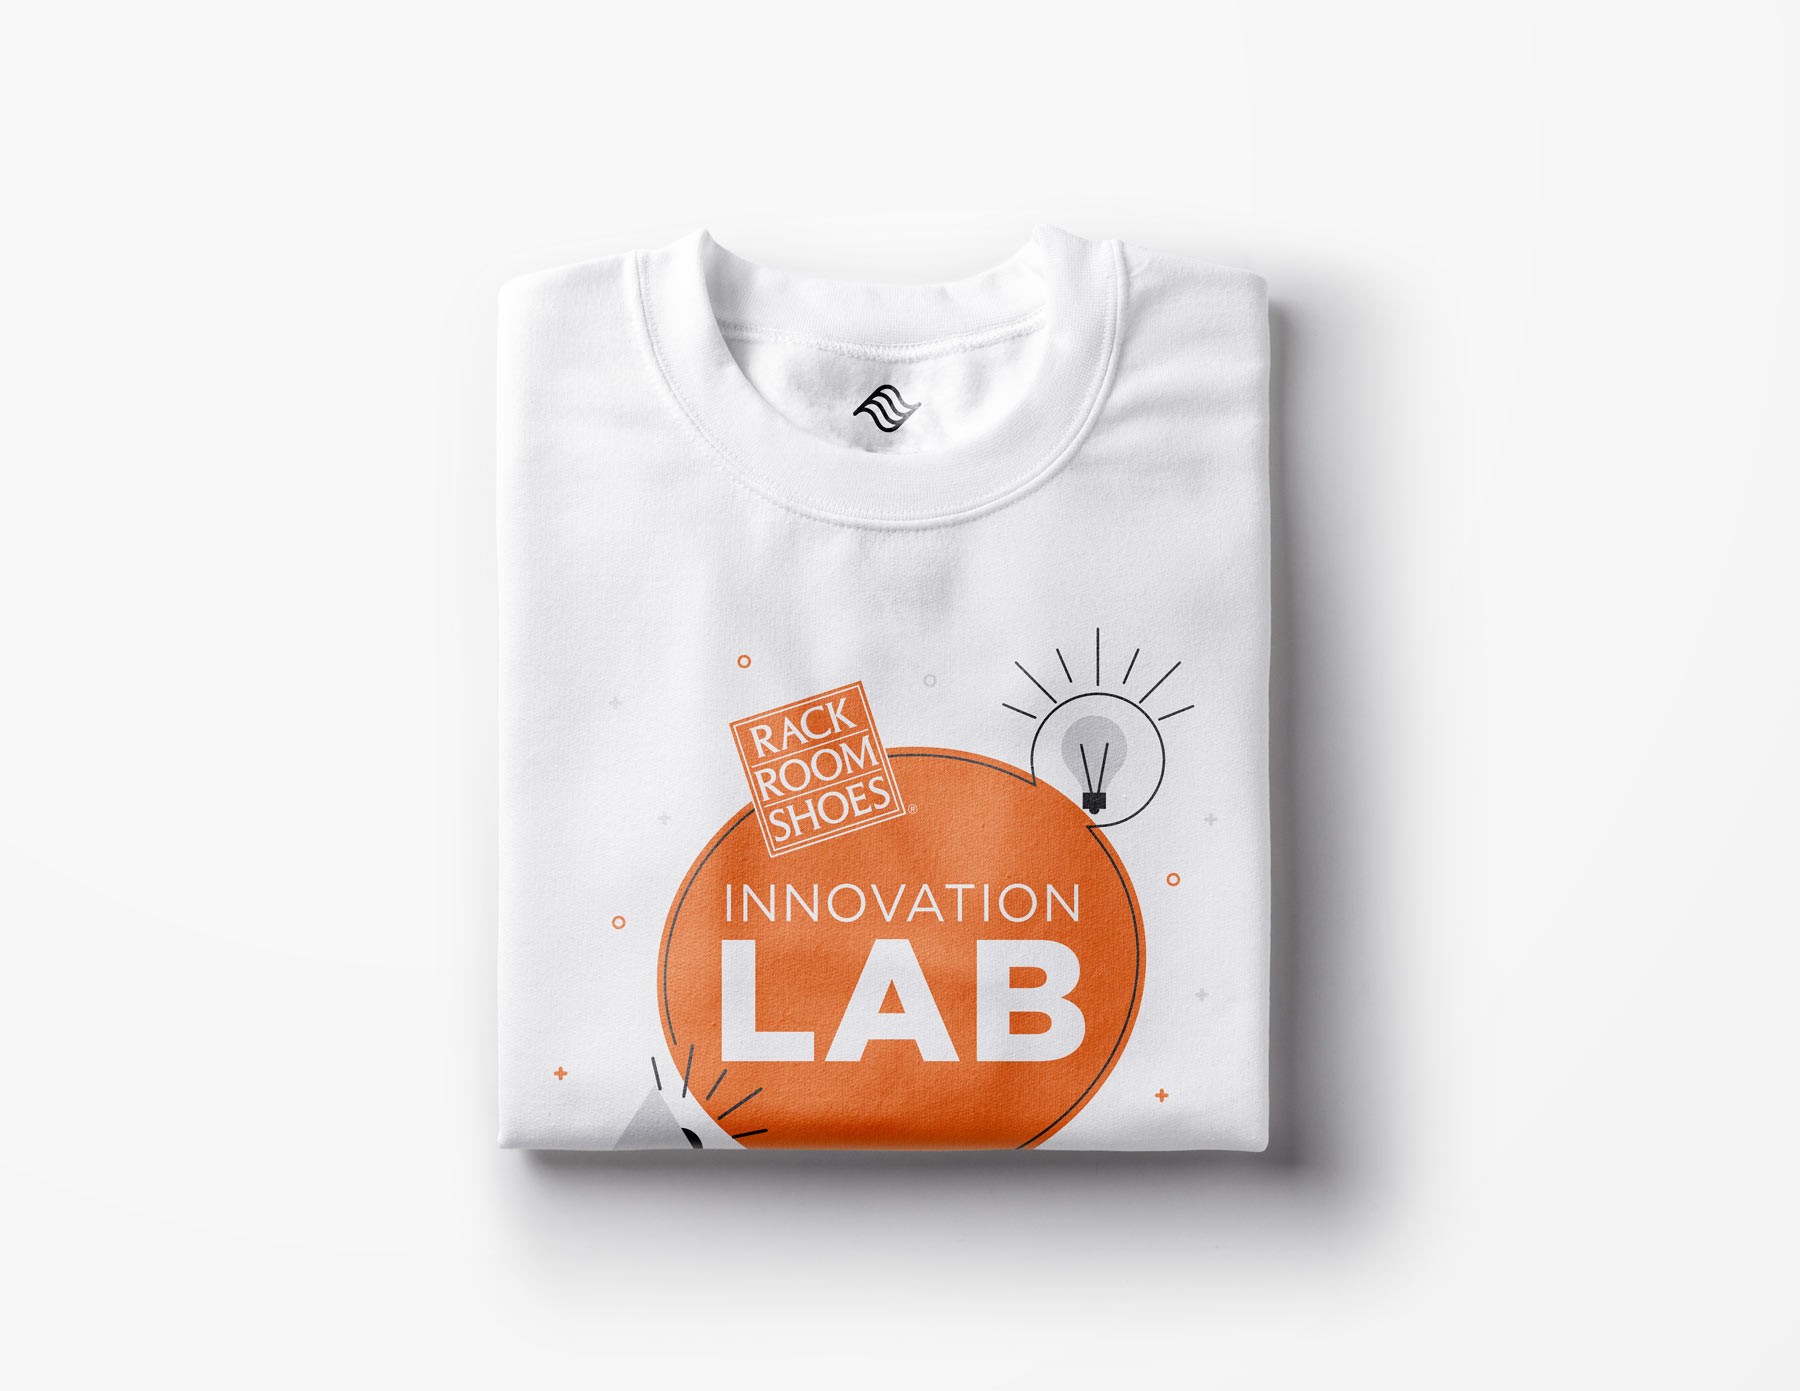 white t-shirt with the innovation lab logo on it posted on a white background